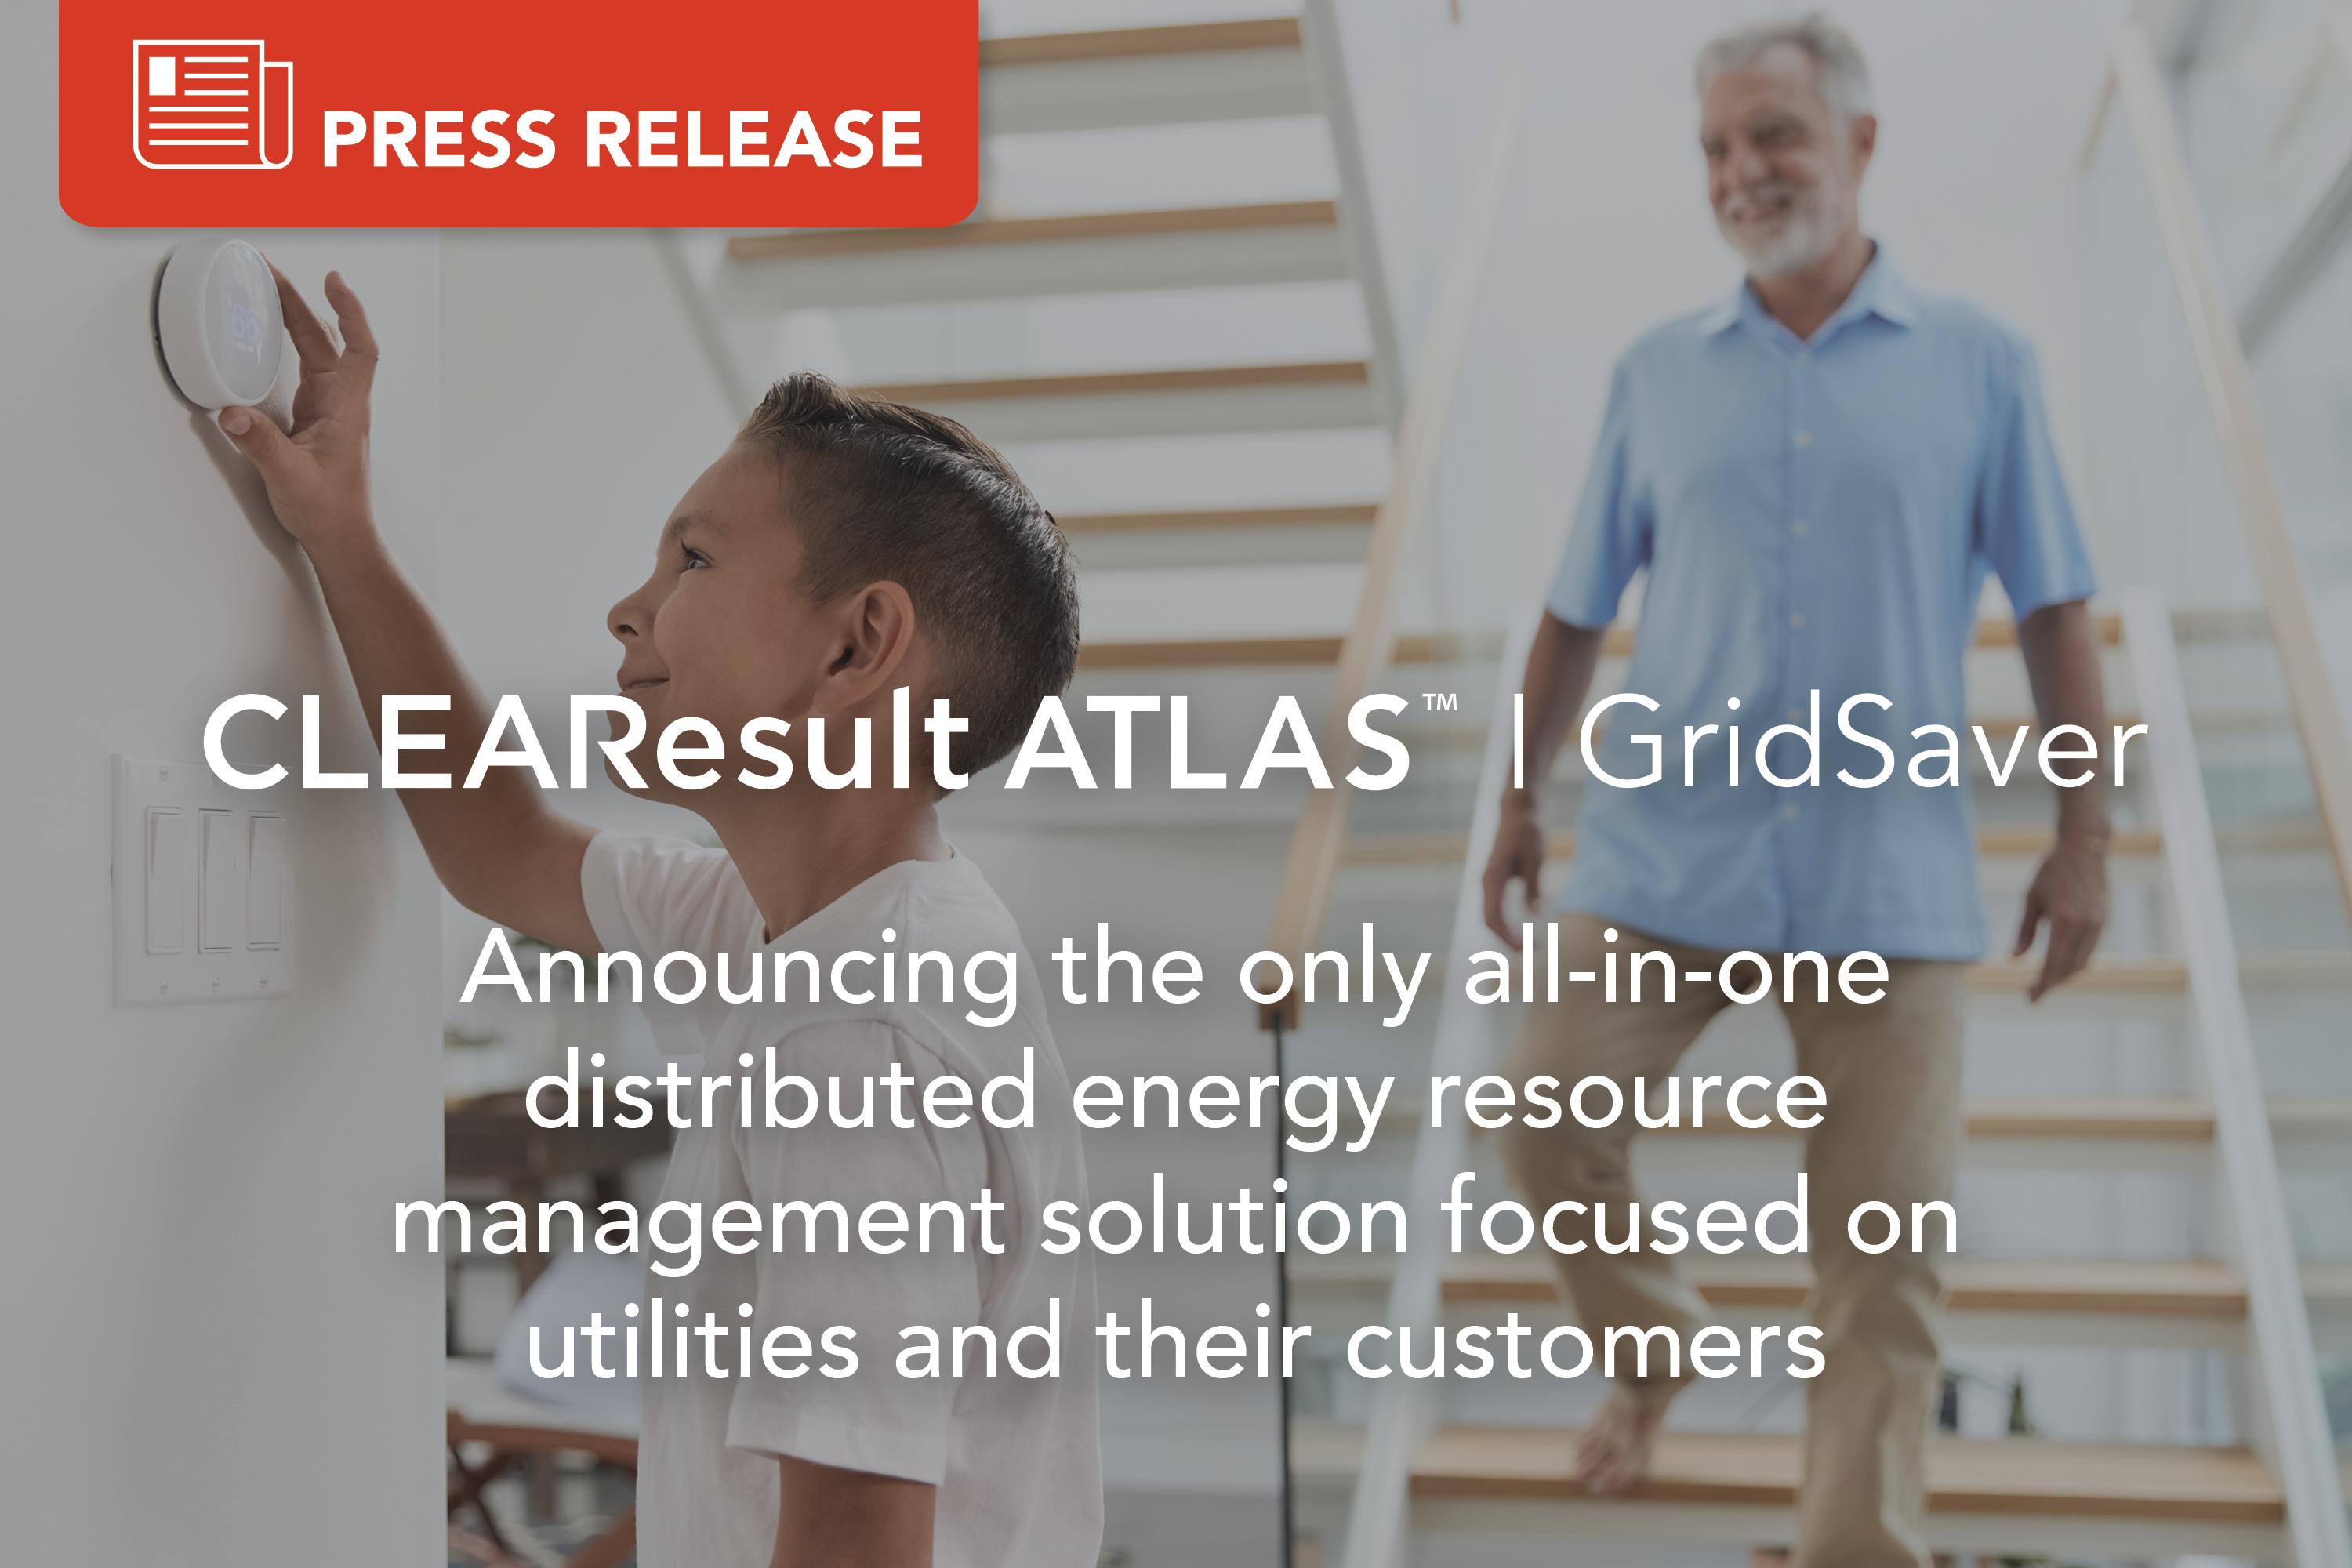 CLEAResult ATLAS™ GridSaver gives utilities and their customers an easy tool to reduce peak demand together